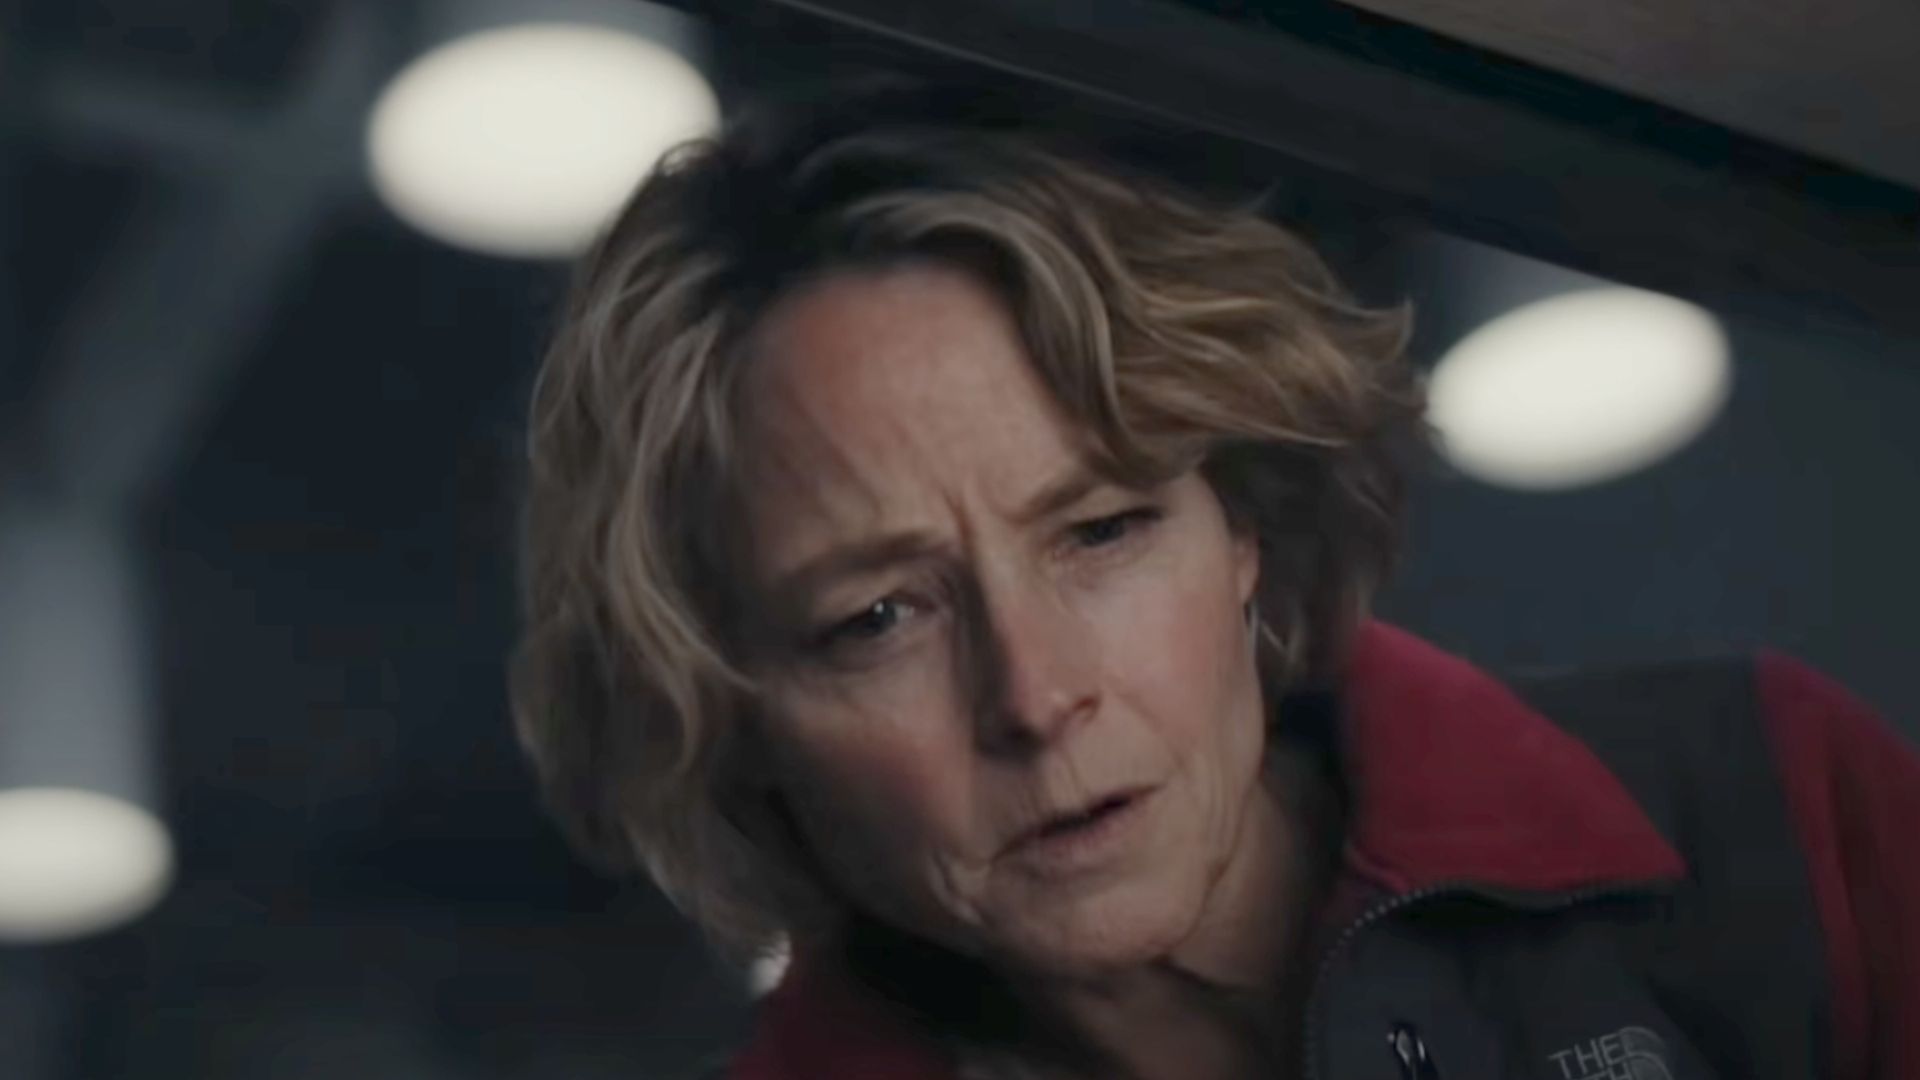 True Detective season 4 shares first look at Jodie Foster in chilling murder mystery - watch